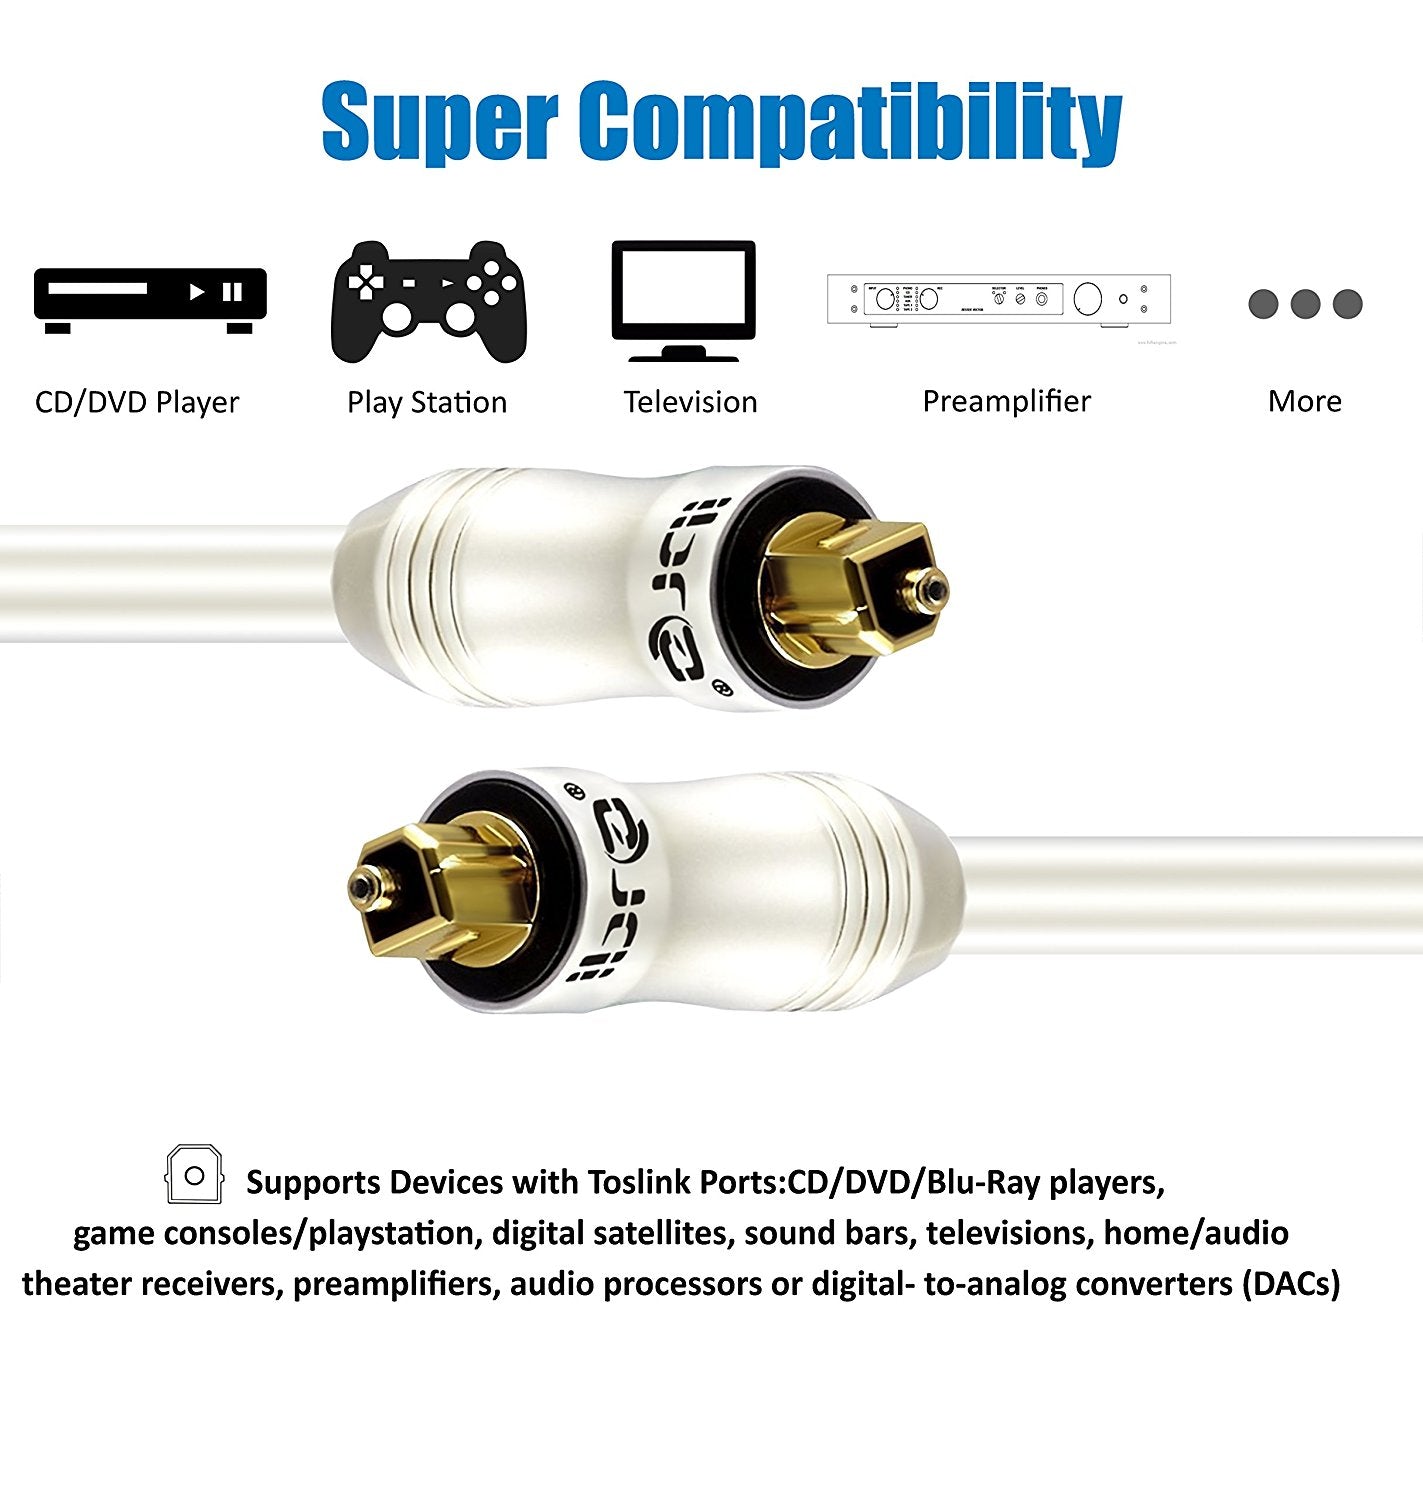 IBRA PEARL 10M - Digital Optical Cable | Toslink / Audio Cable | Fibre Optic Cable | Suitable for PS3, Sky, Sky HD, LCD, LED, Plasma, Blu-ray, AV Amps